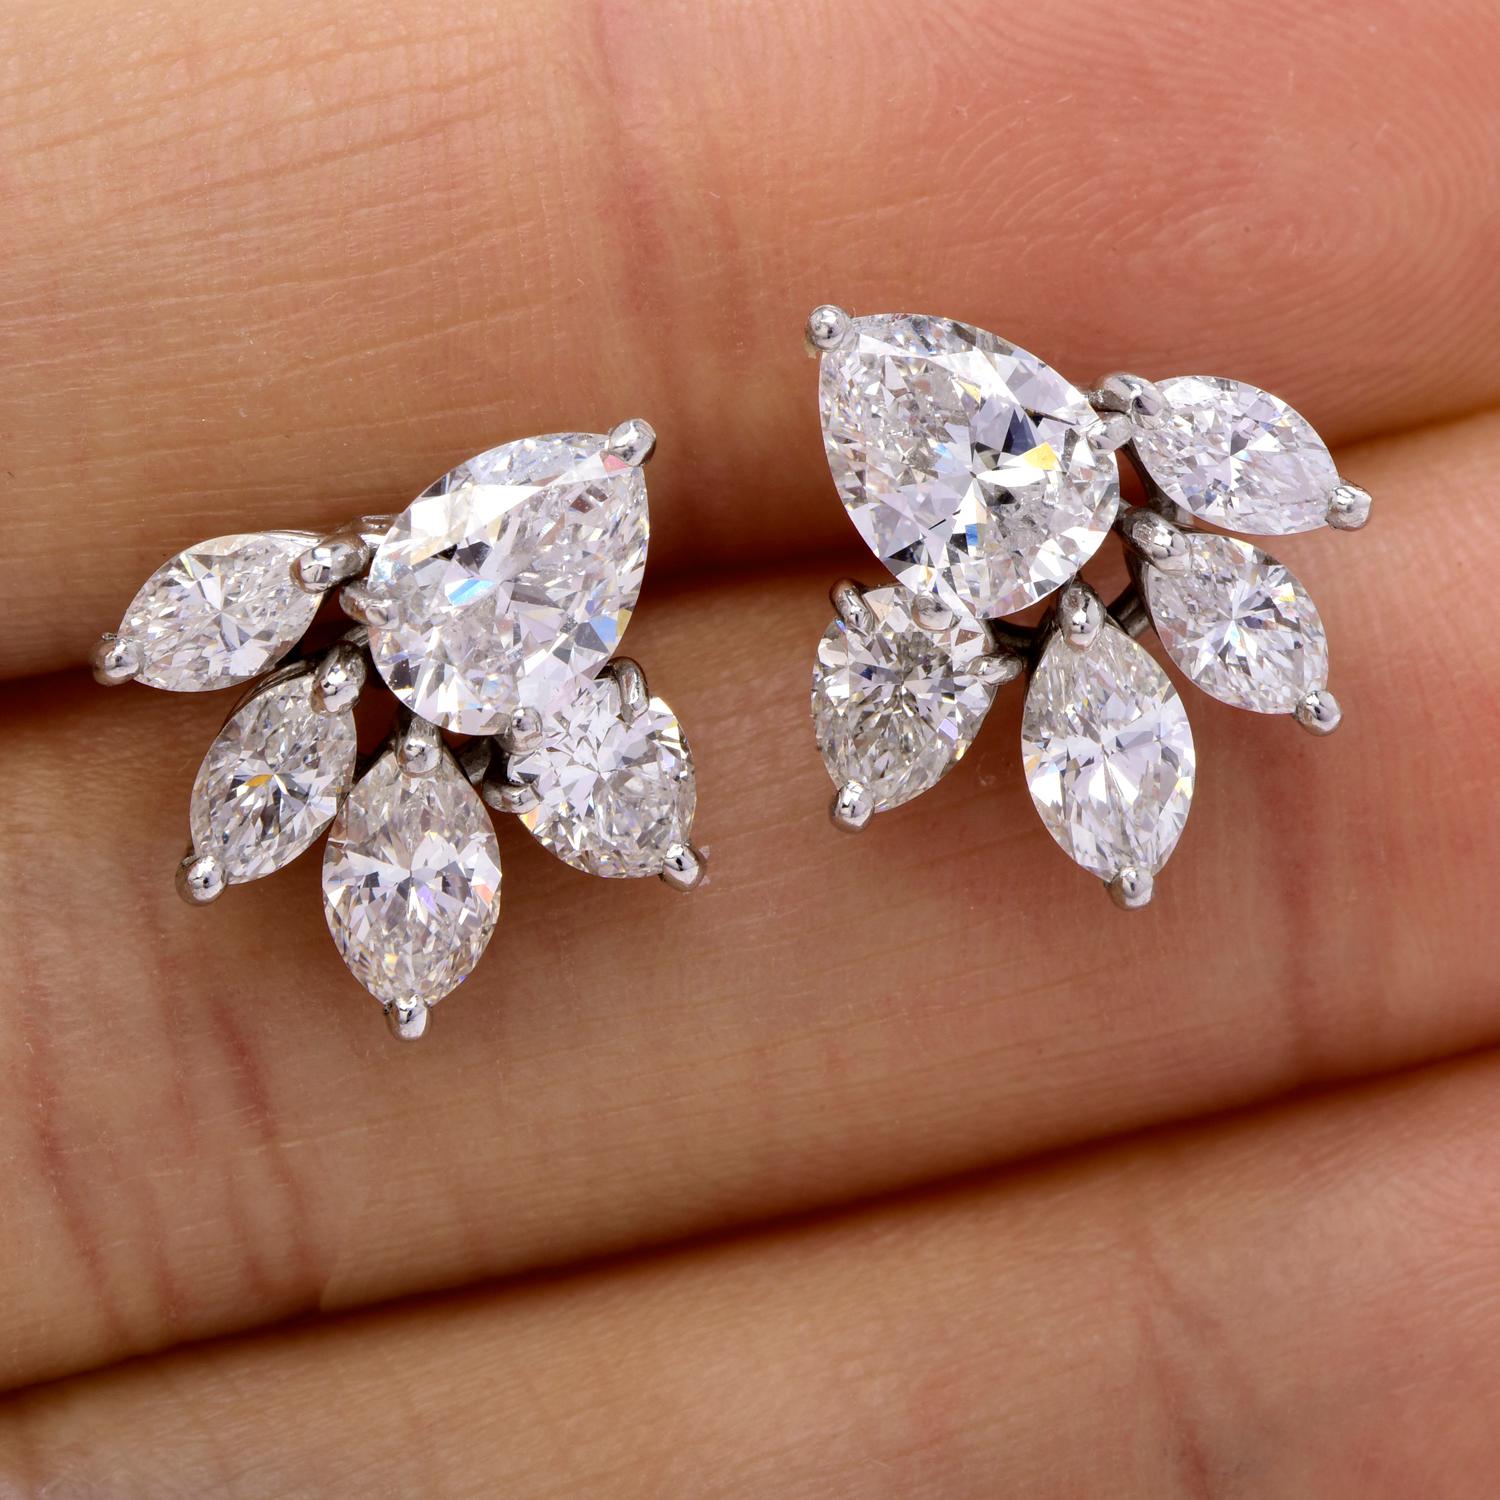 Pear Cut Exceptional D Color 3.82cts Pear Diamond Cluster Platinum Stud Earrings